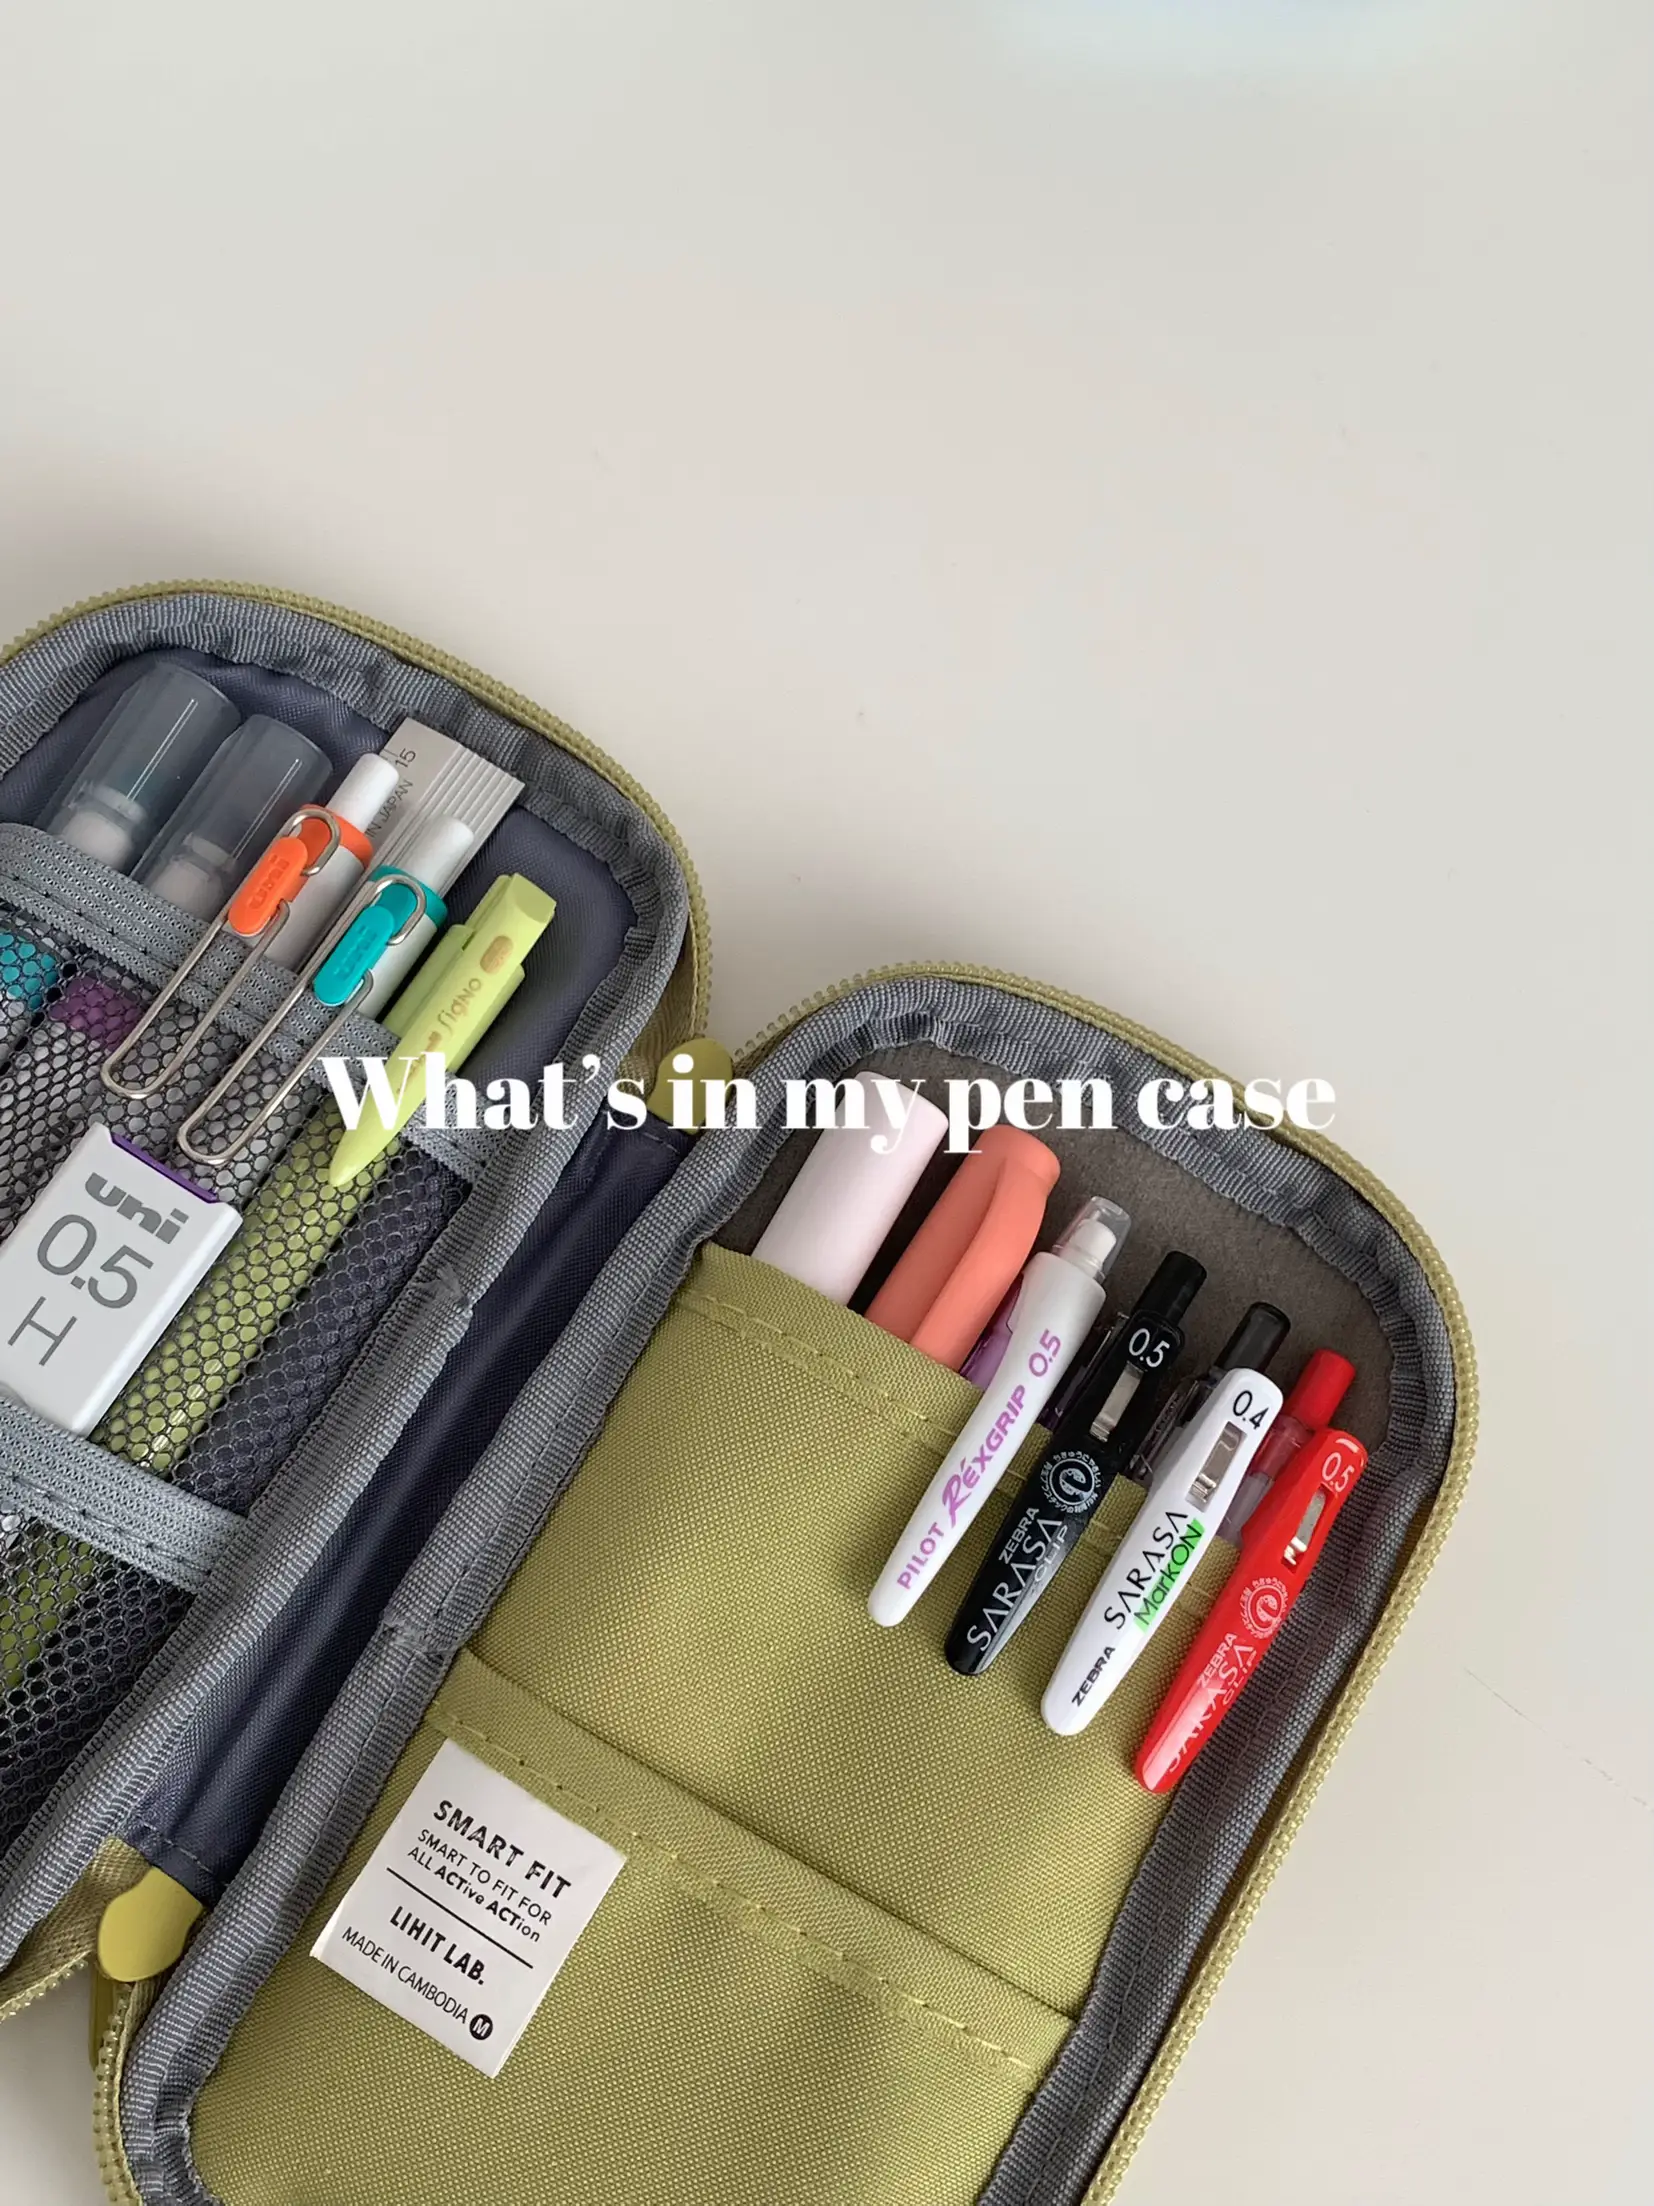 Lihit Lab Compact Pen Case, Let's Take a Look